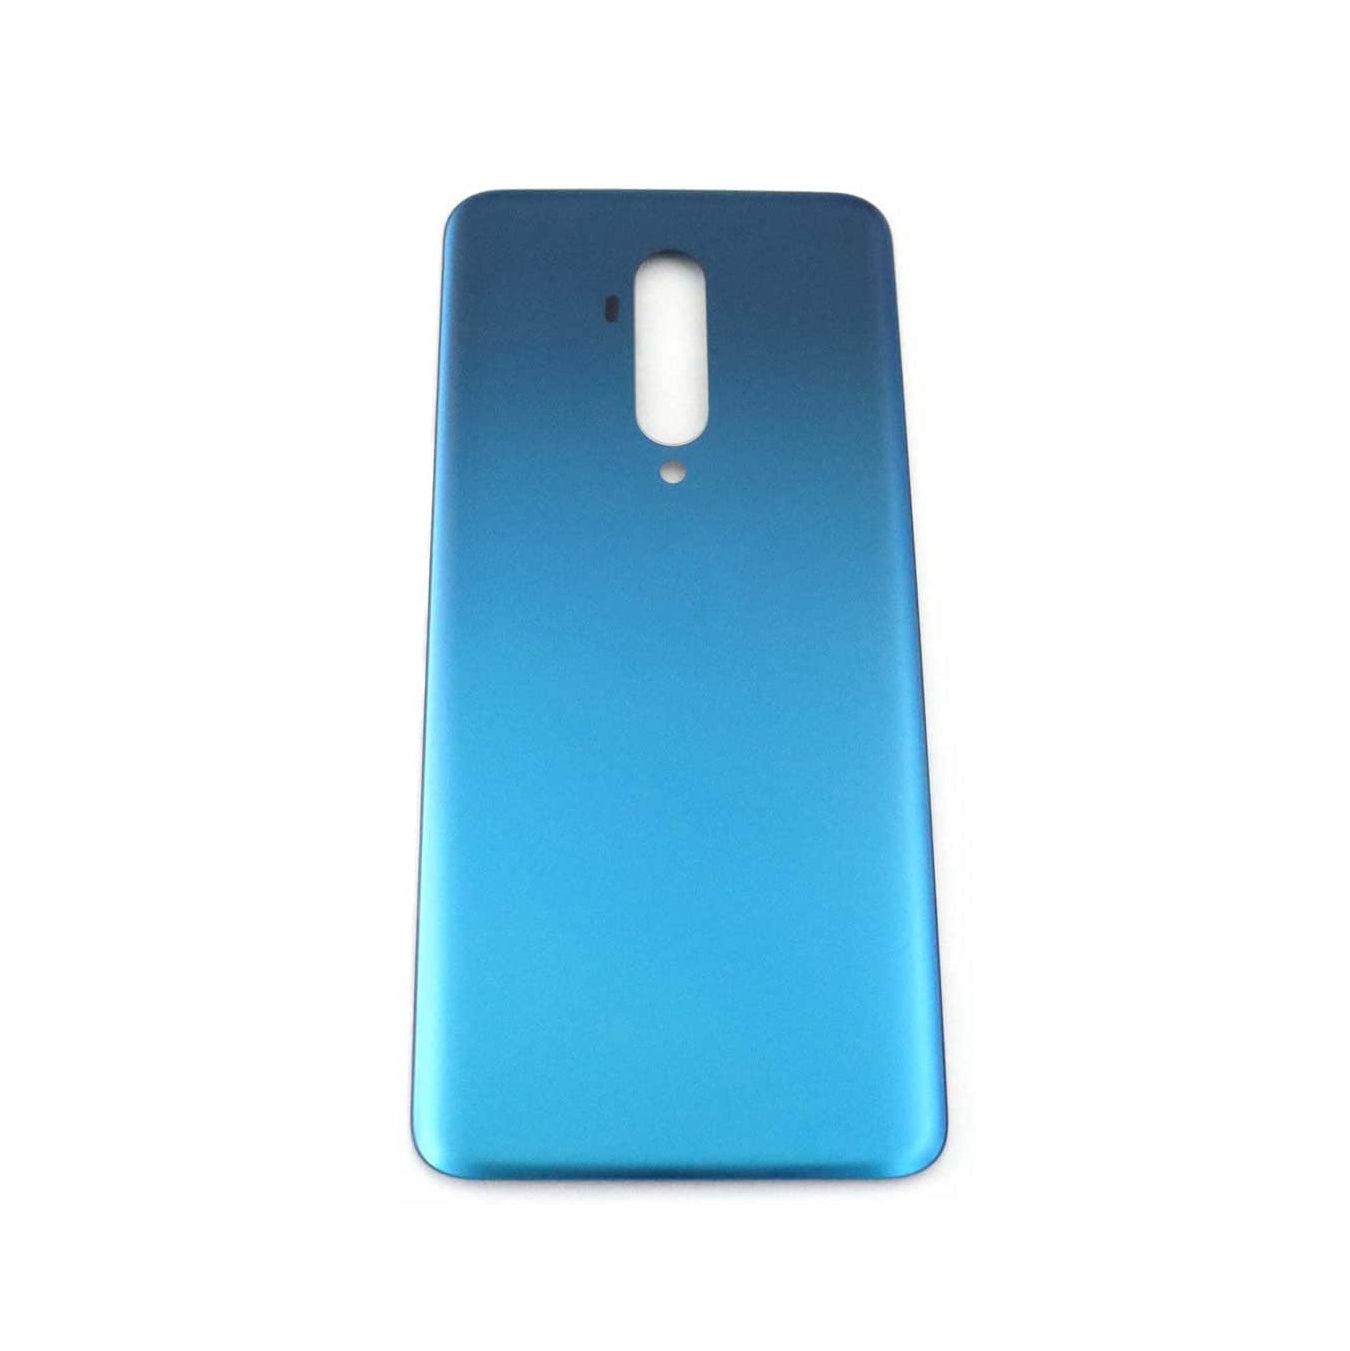 Replacement Rear Glass For OnePlus 7T Pro Battery Cover With Adhesive - Blue-Mobile Phone Parts-First Help Tech